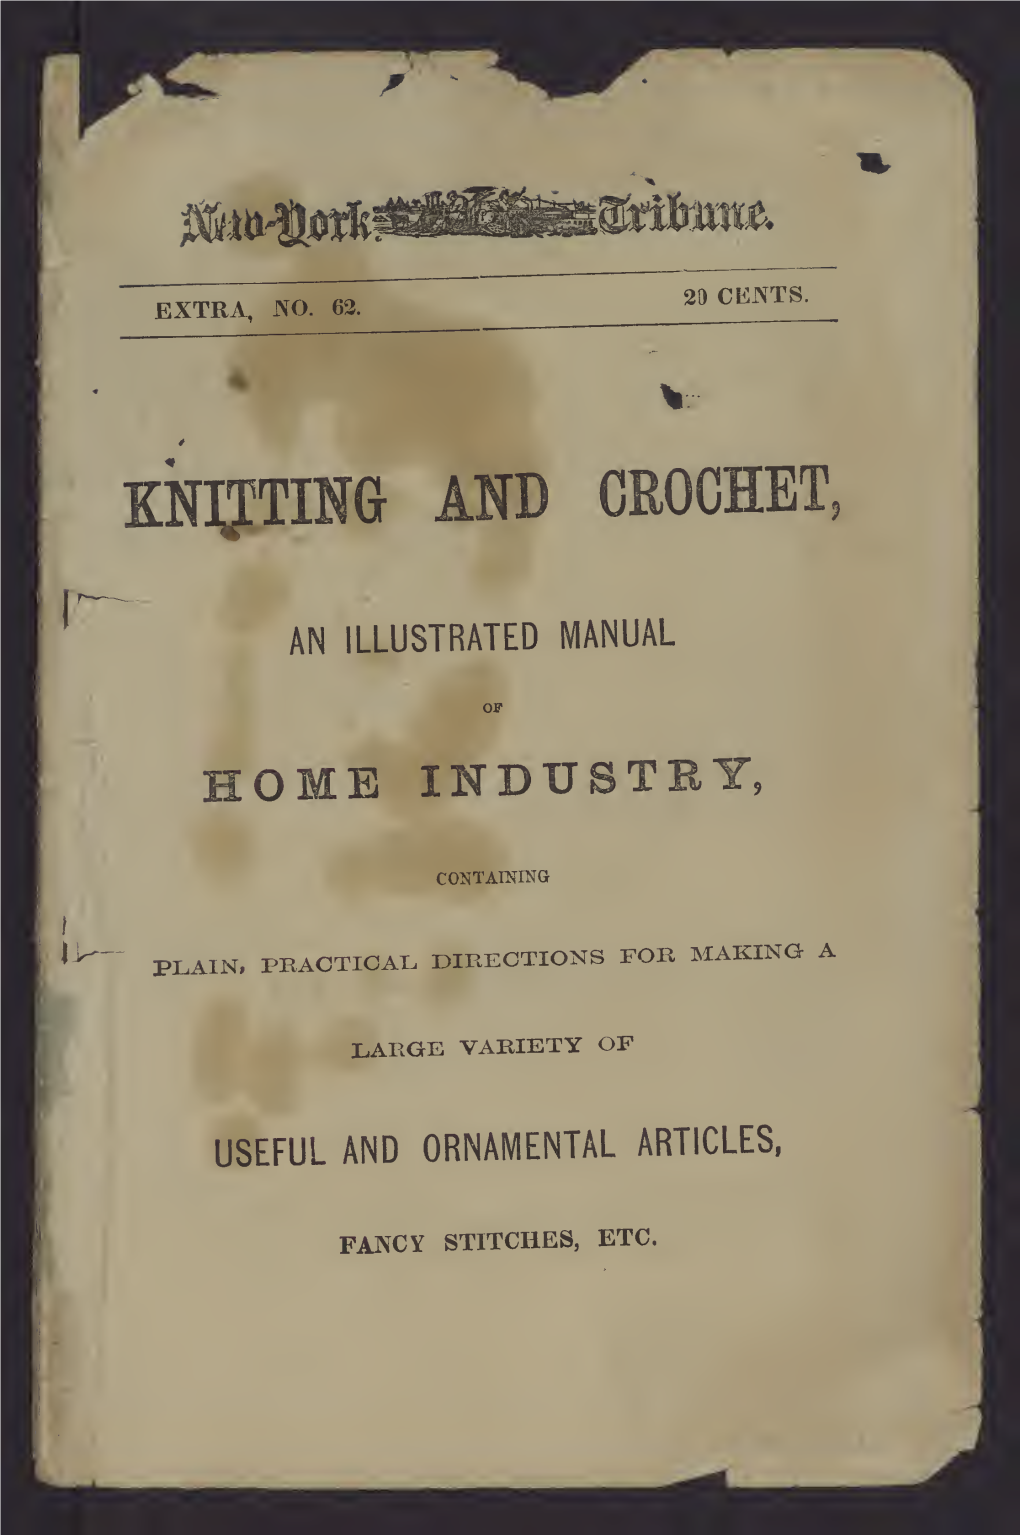 Knitting and Crochet an Illustrated Manual of Home Industry